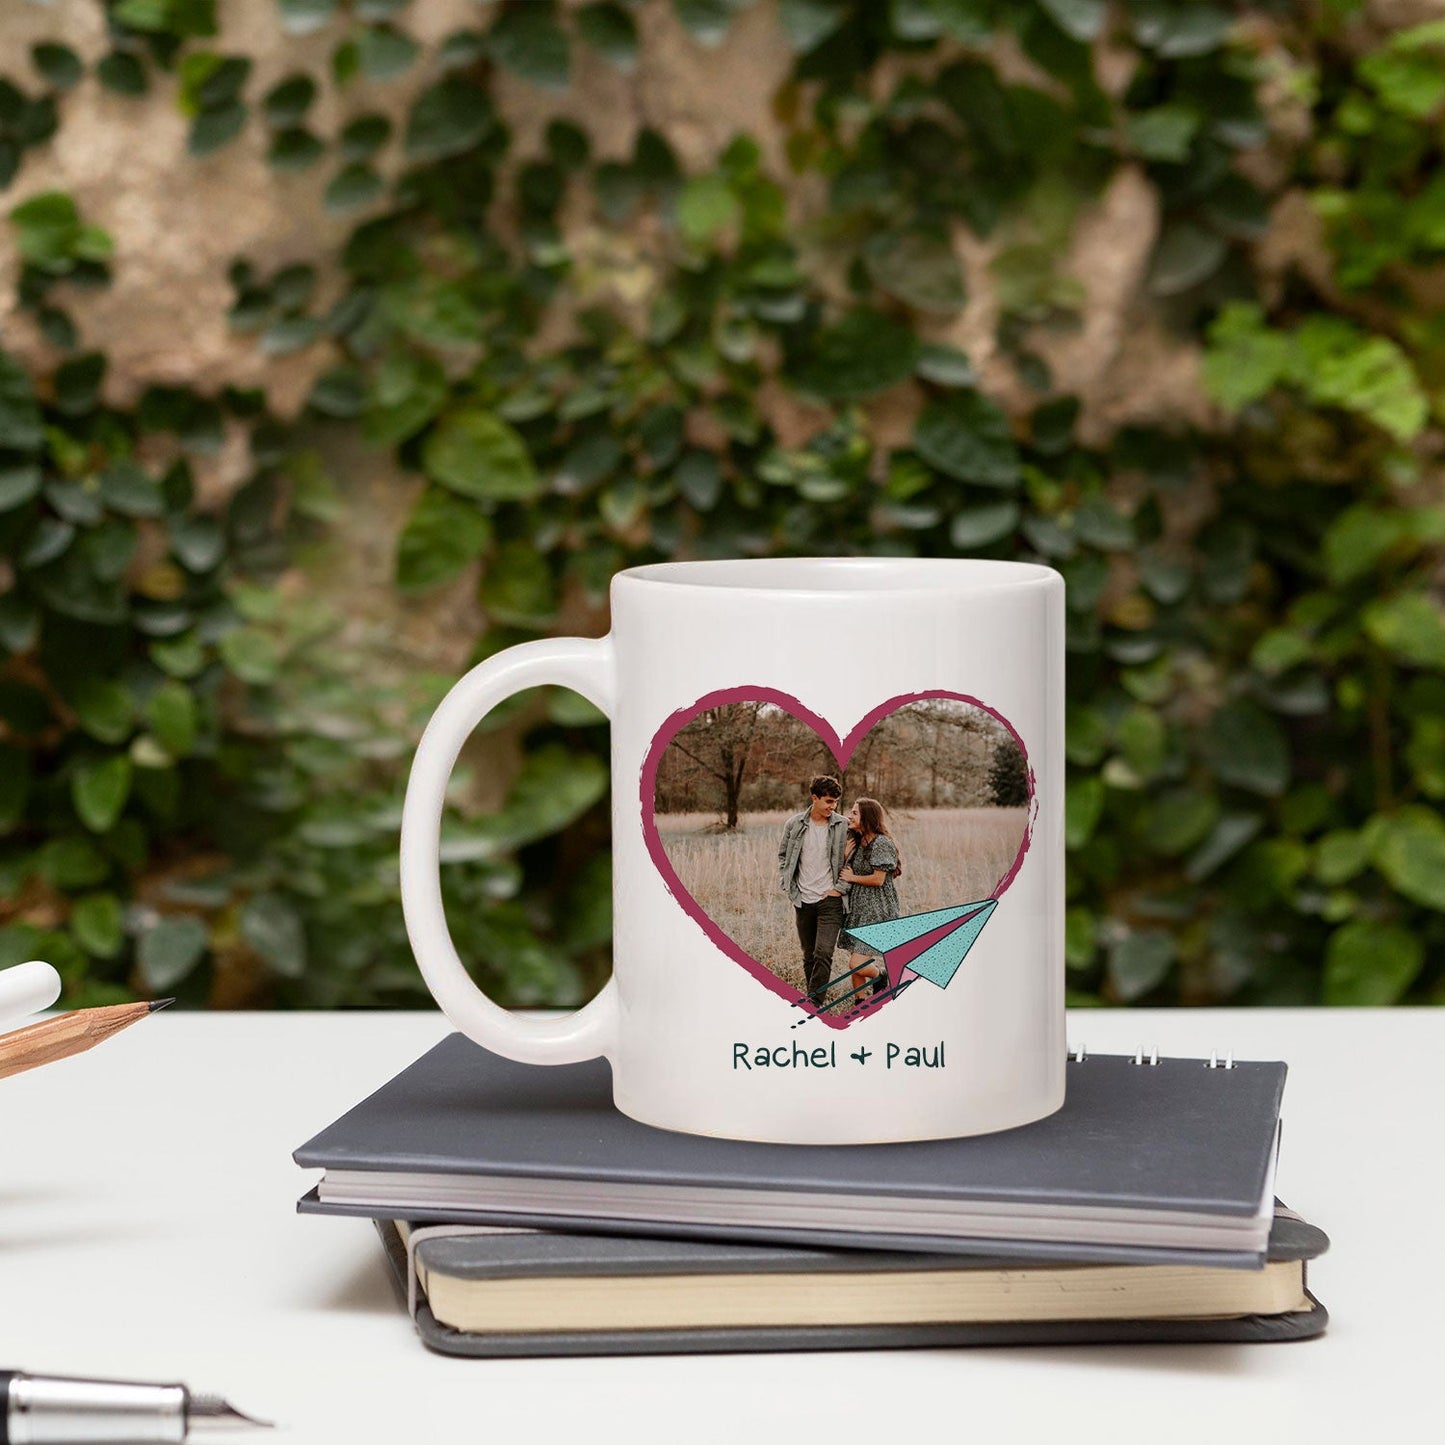 I Miss Your Face - Personalized Anniversary, Valentine's Day, Birthday or Christmas gift For Long Distance Boyfriend or Girlfriend - Custom Mug - MyMindfulGifts